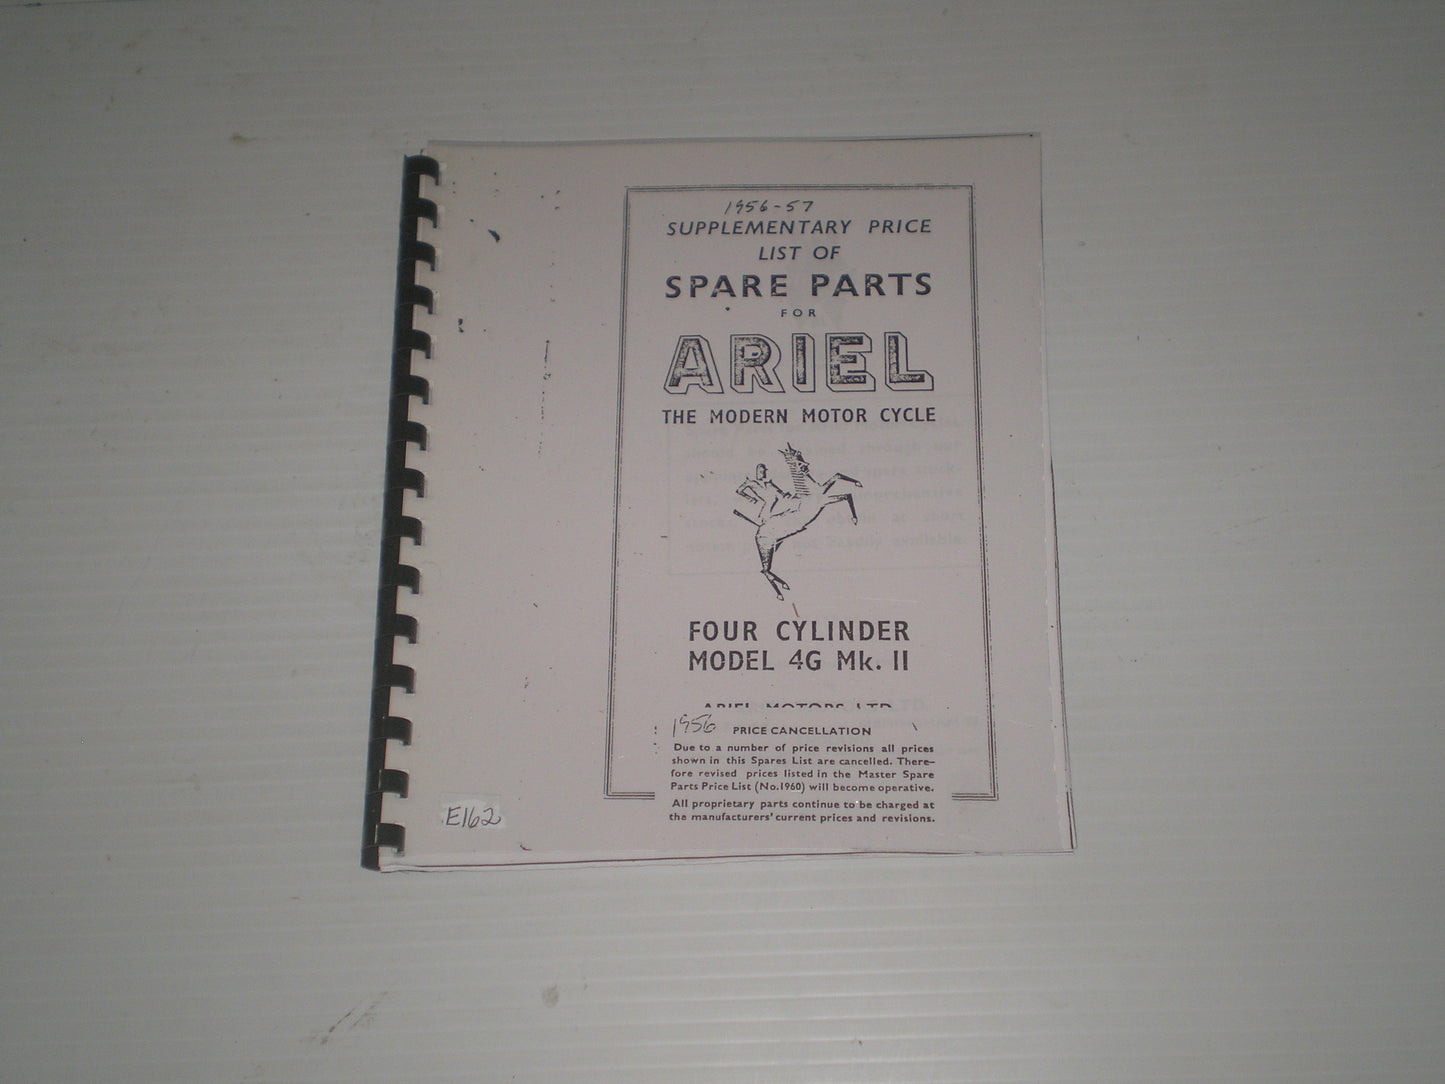 ARIEL Four Cylinder Model 4G Mk.II 1956-1957  Price List for Spare Parts  #E162